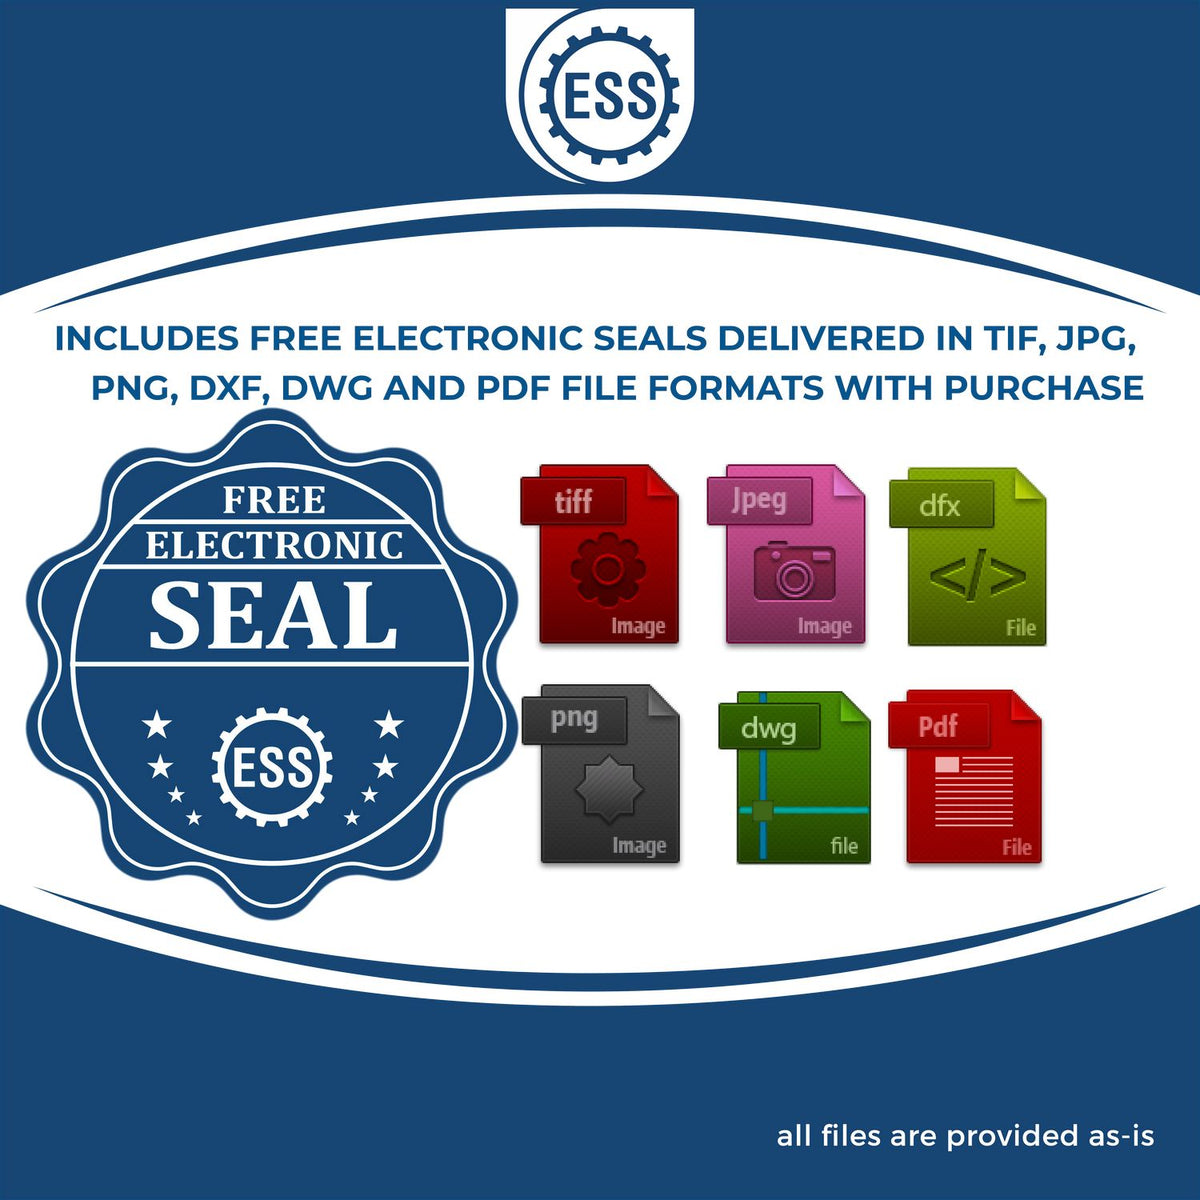 An infographic for the free electronic seal for the Wooden Handle Minnesota State Seal Notary Public Stamp illustrating the different file type icons such as DXF, DWG, TIF, JPG and PNG.